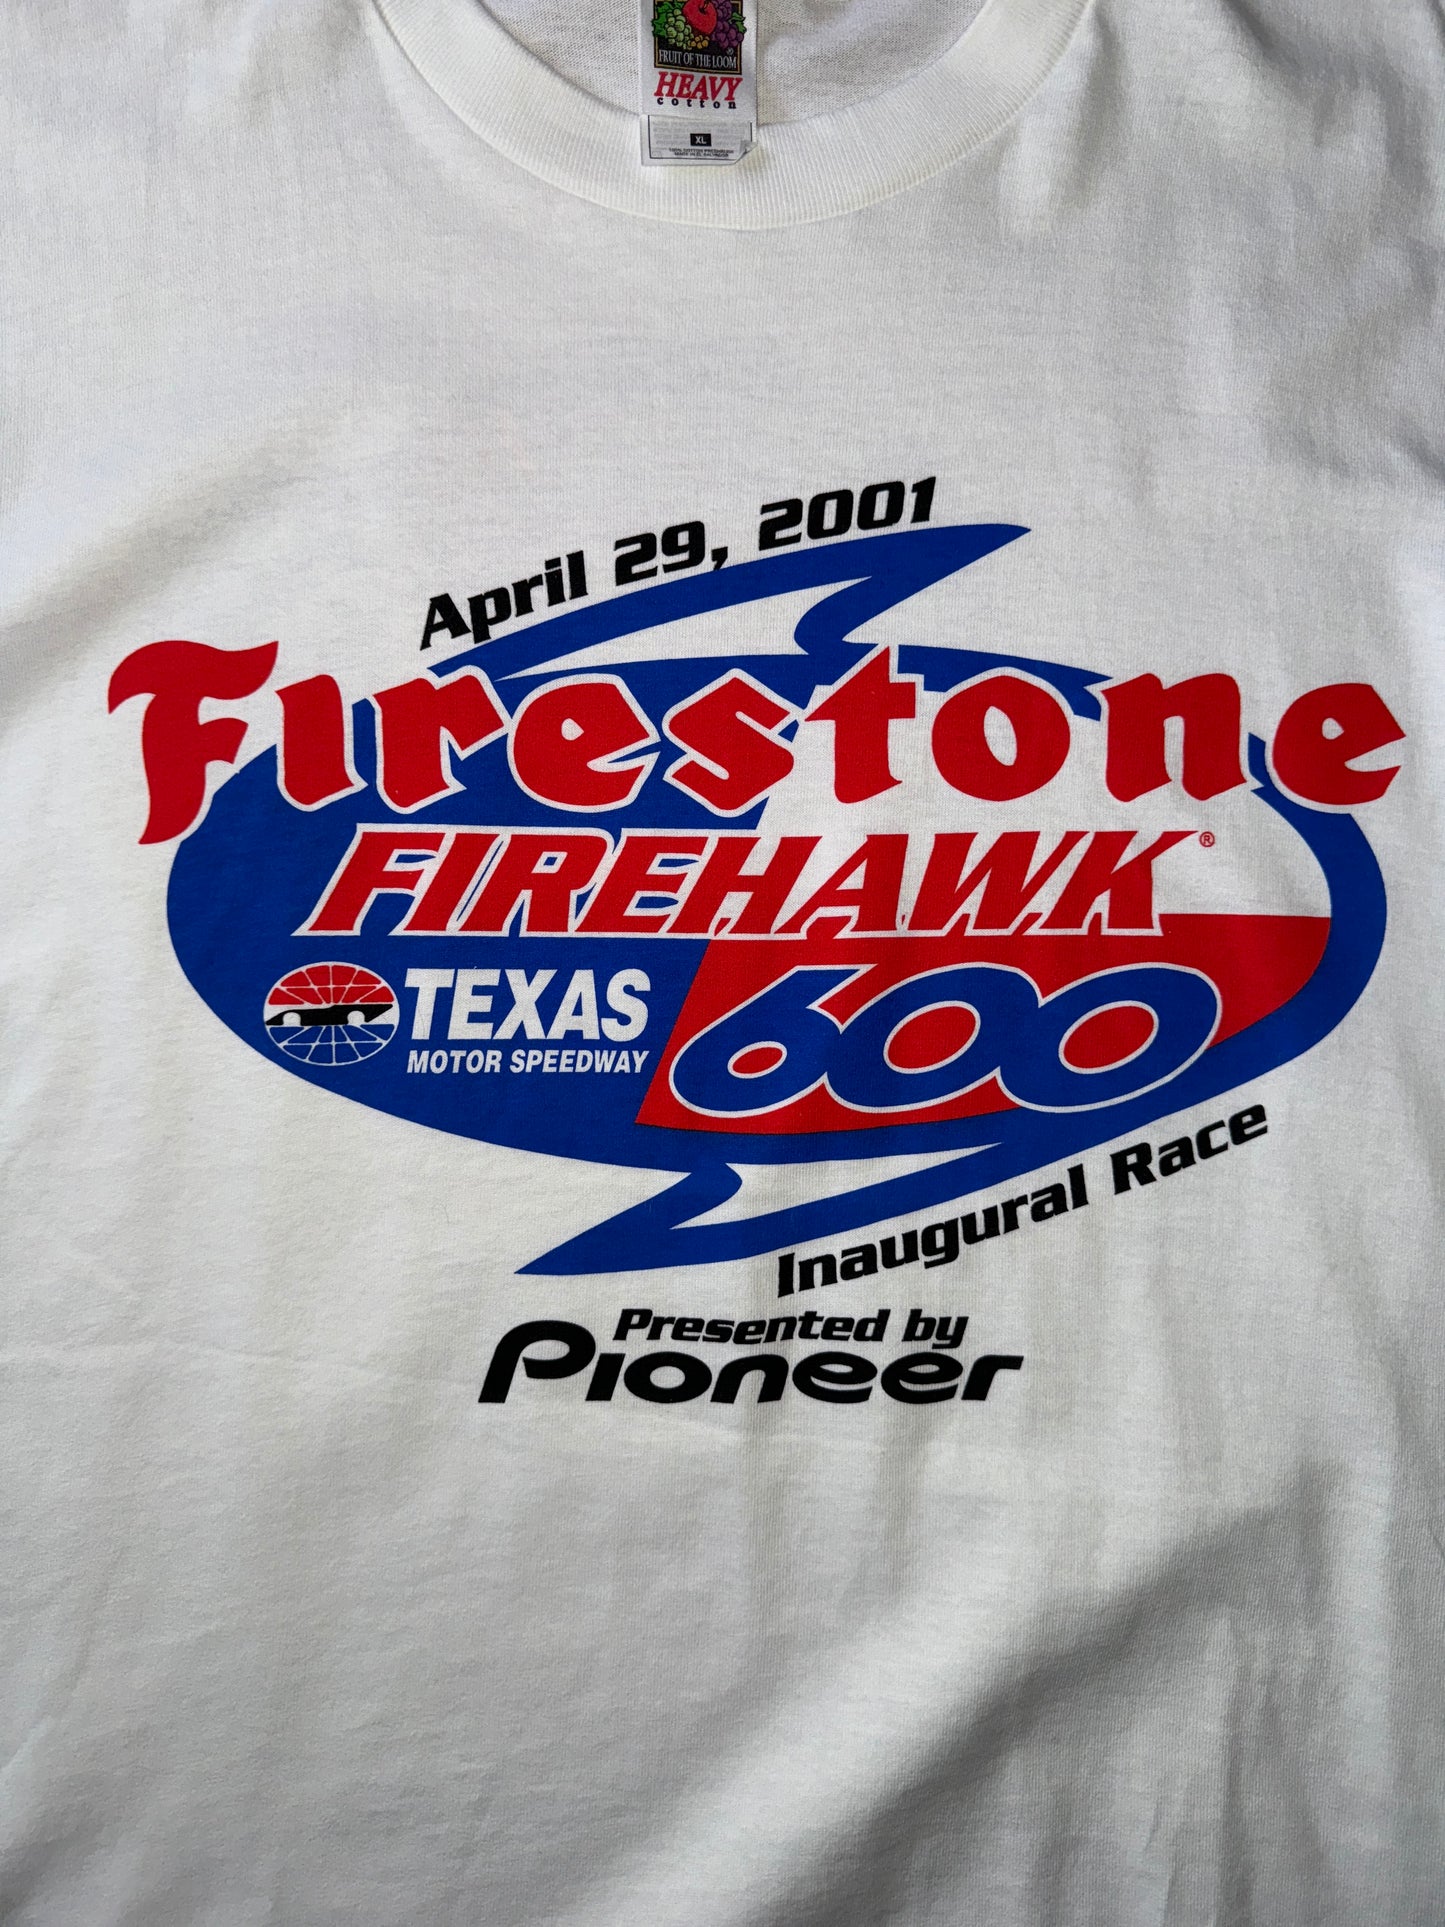 Vintage Firestone Firehawk 600 CART Series Indy Car Racing Extremely Rare